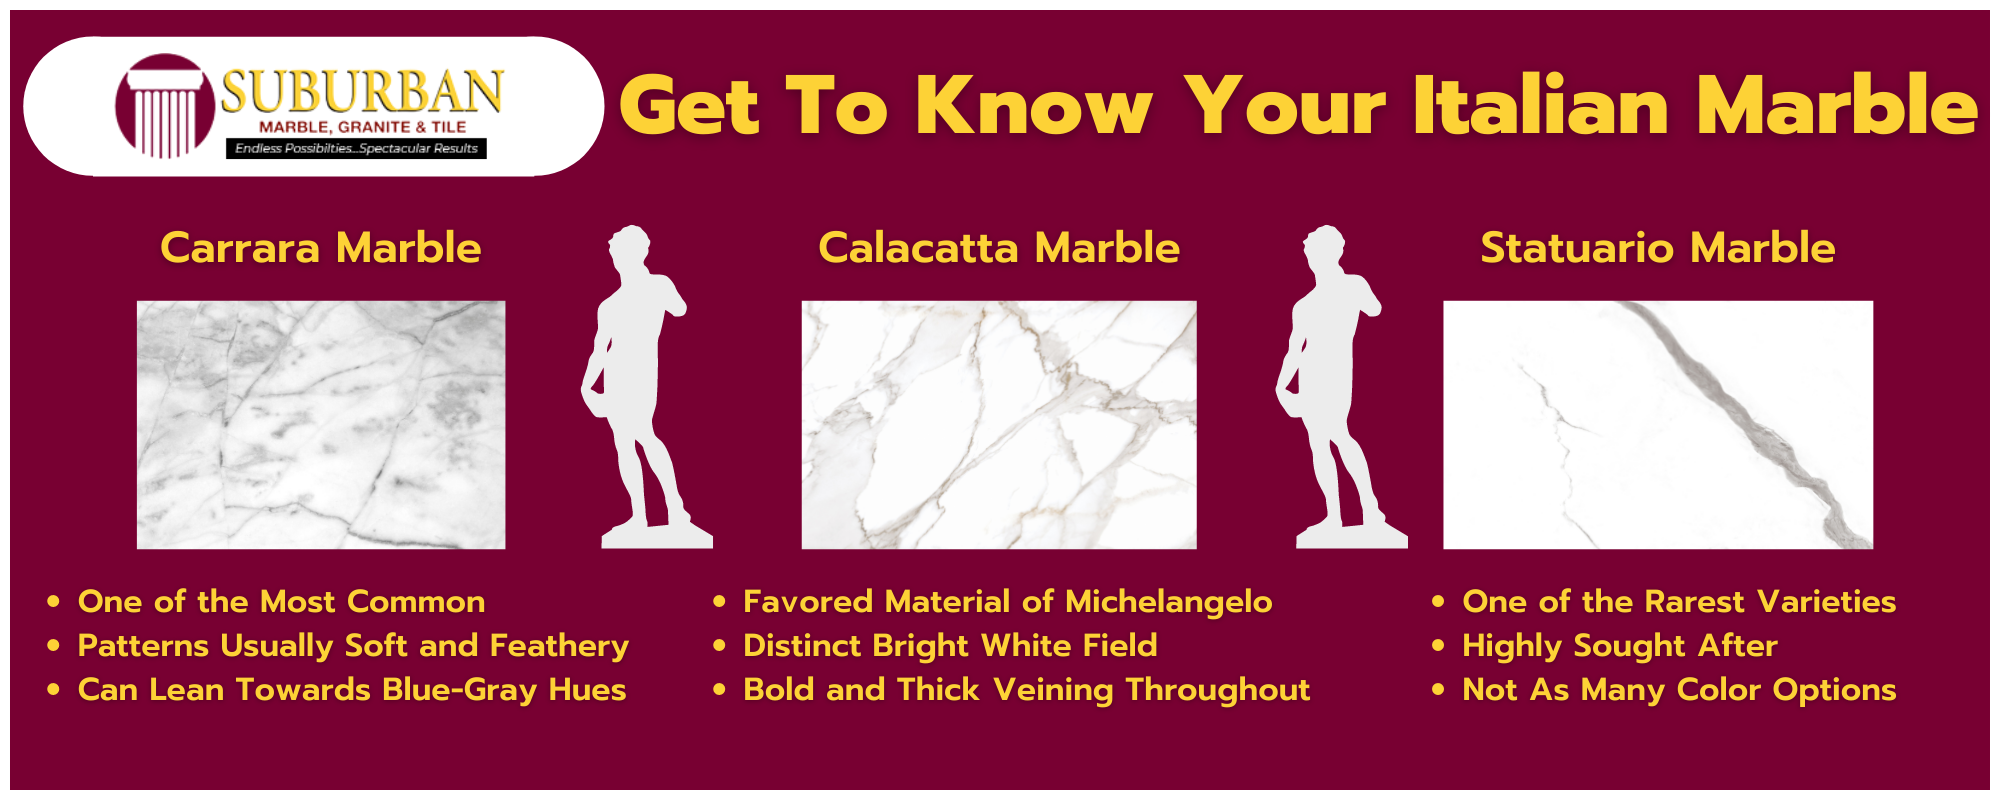 Infographic detailing the varieties of Italian marble